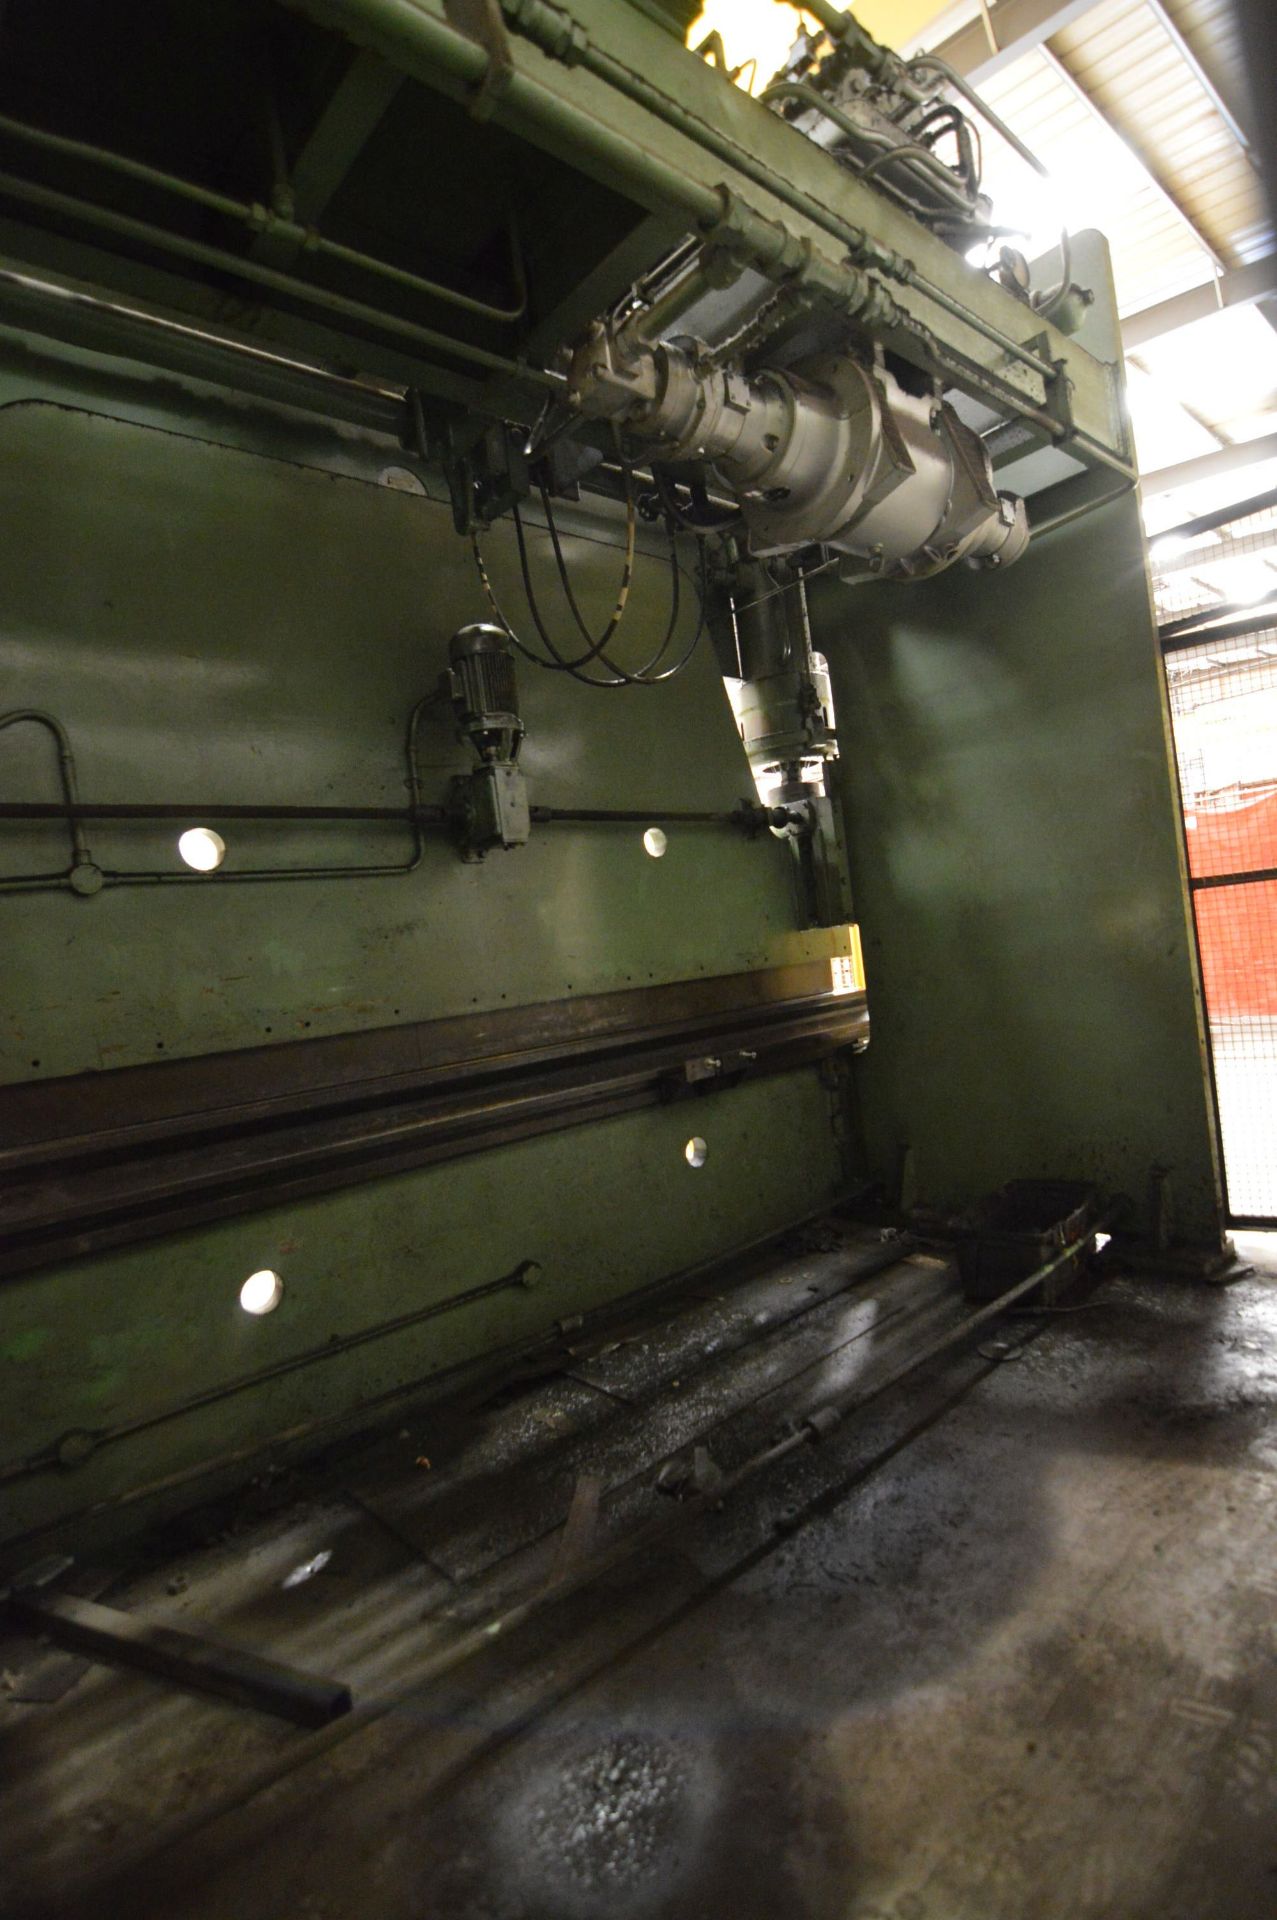 Bronx 200.220.10.H 160 tonne HYDRAULIC PRESS BRAKE, serial no. 30675, 12ft wide, with Sick infra-red - Image 6 of 8